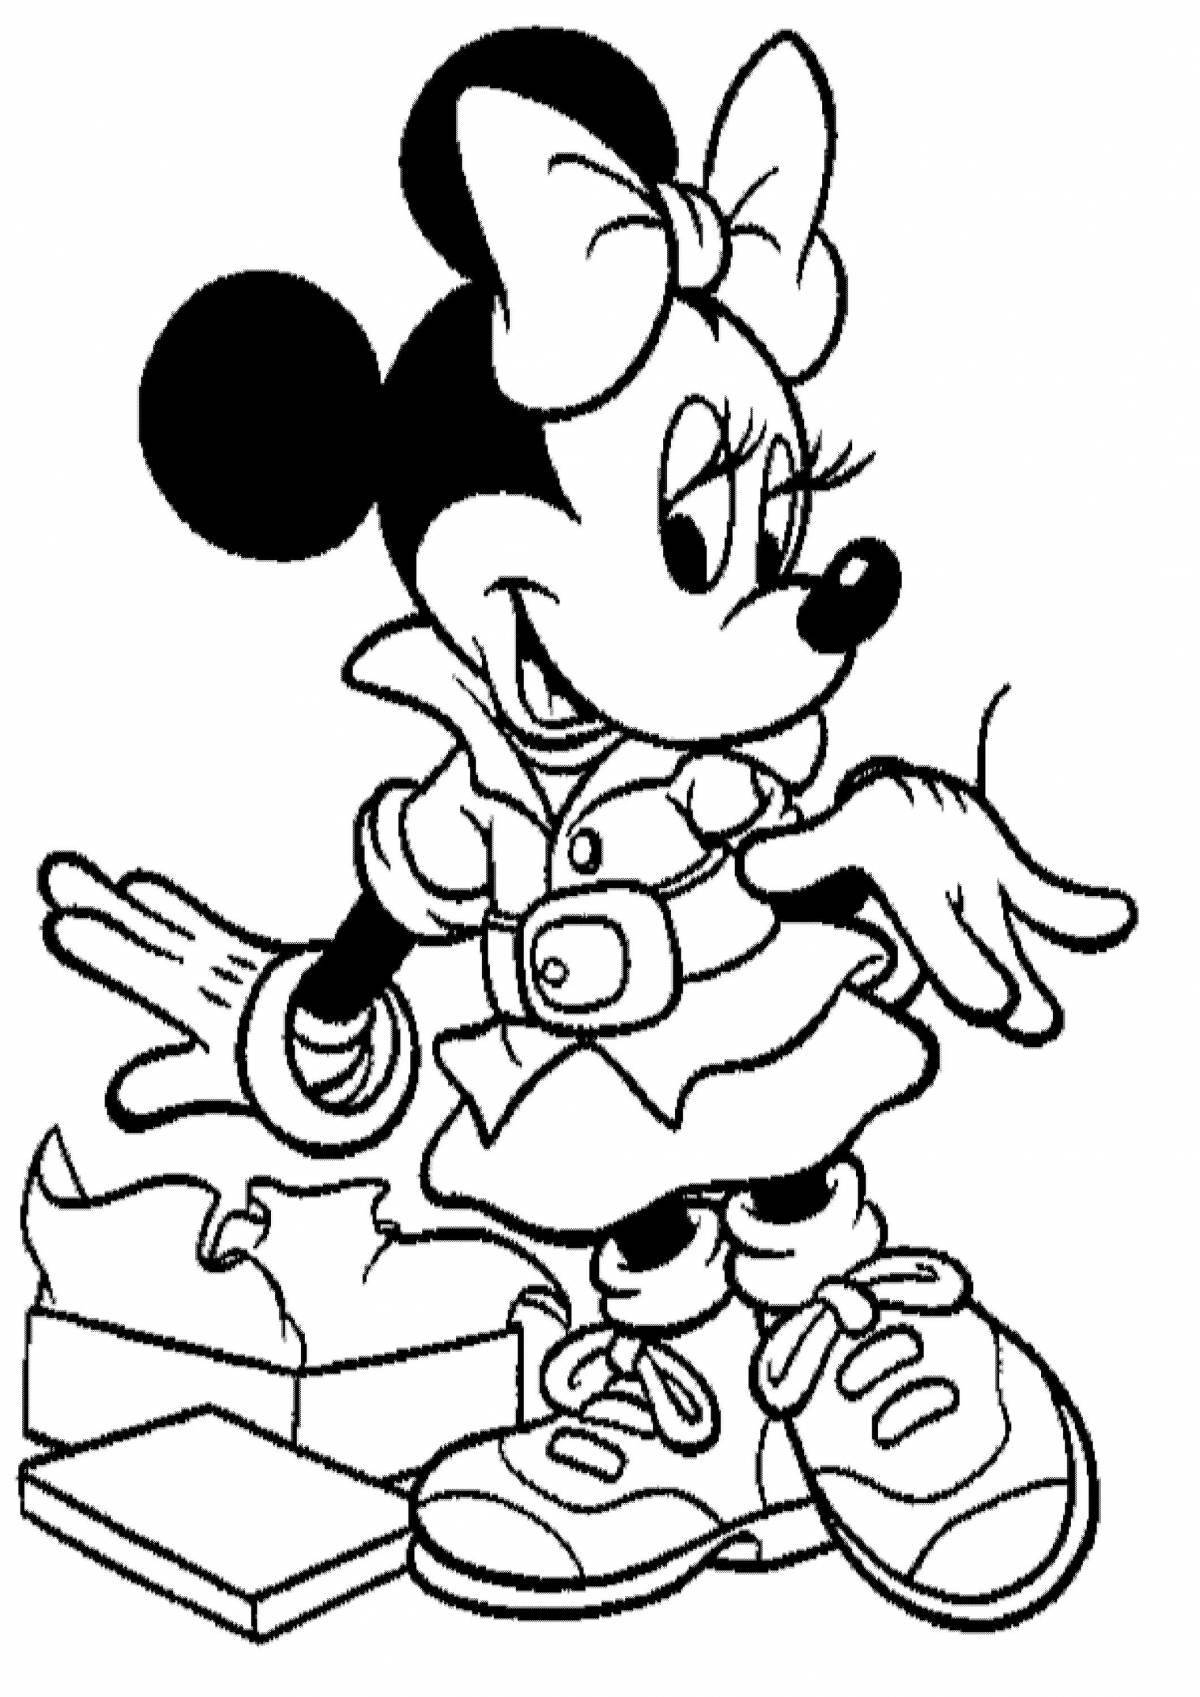 Minnie mouse coloring book for kids